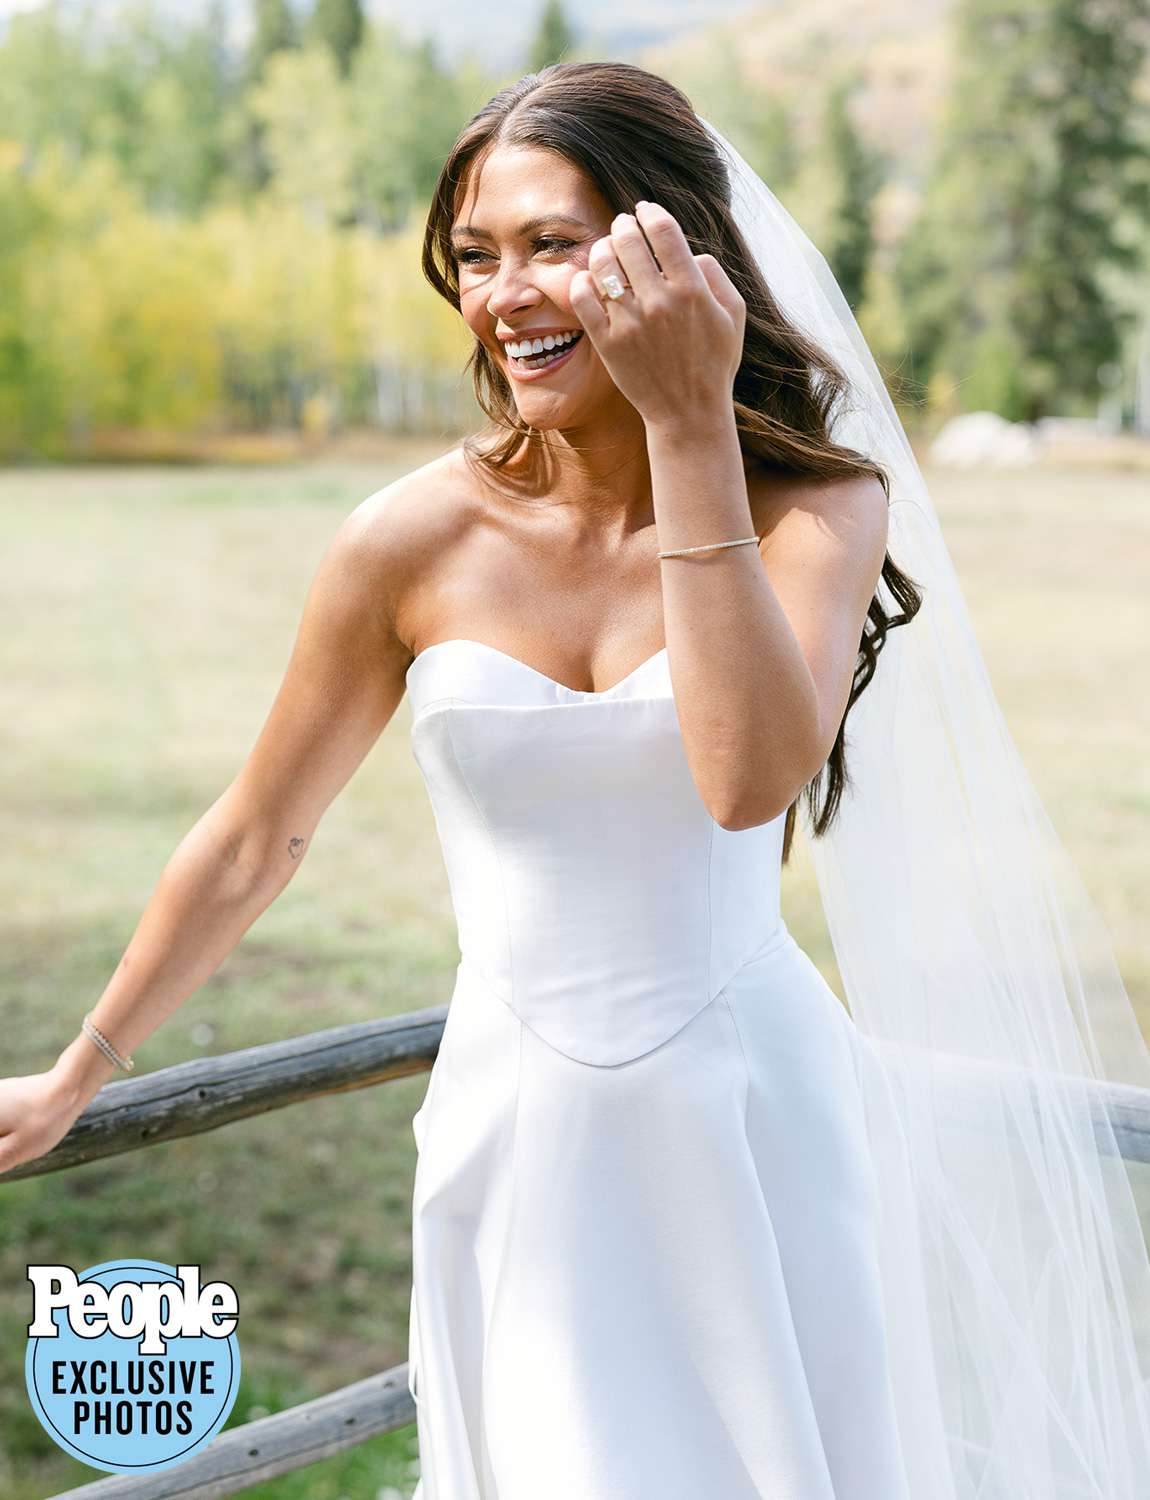 A gushing bride showing off her Caelynn dress